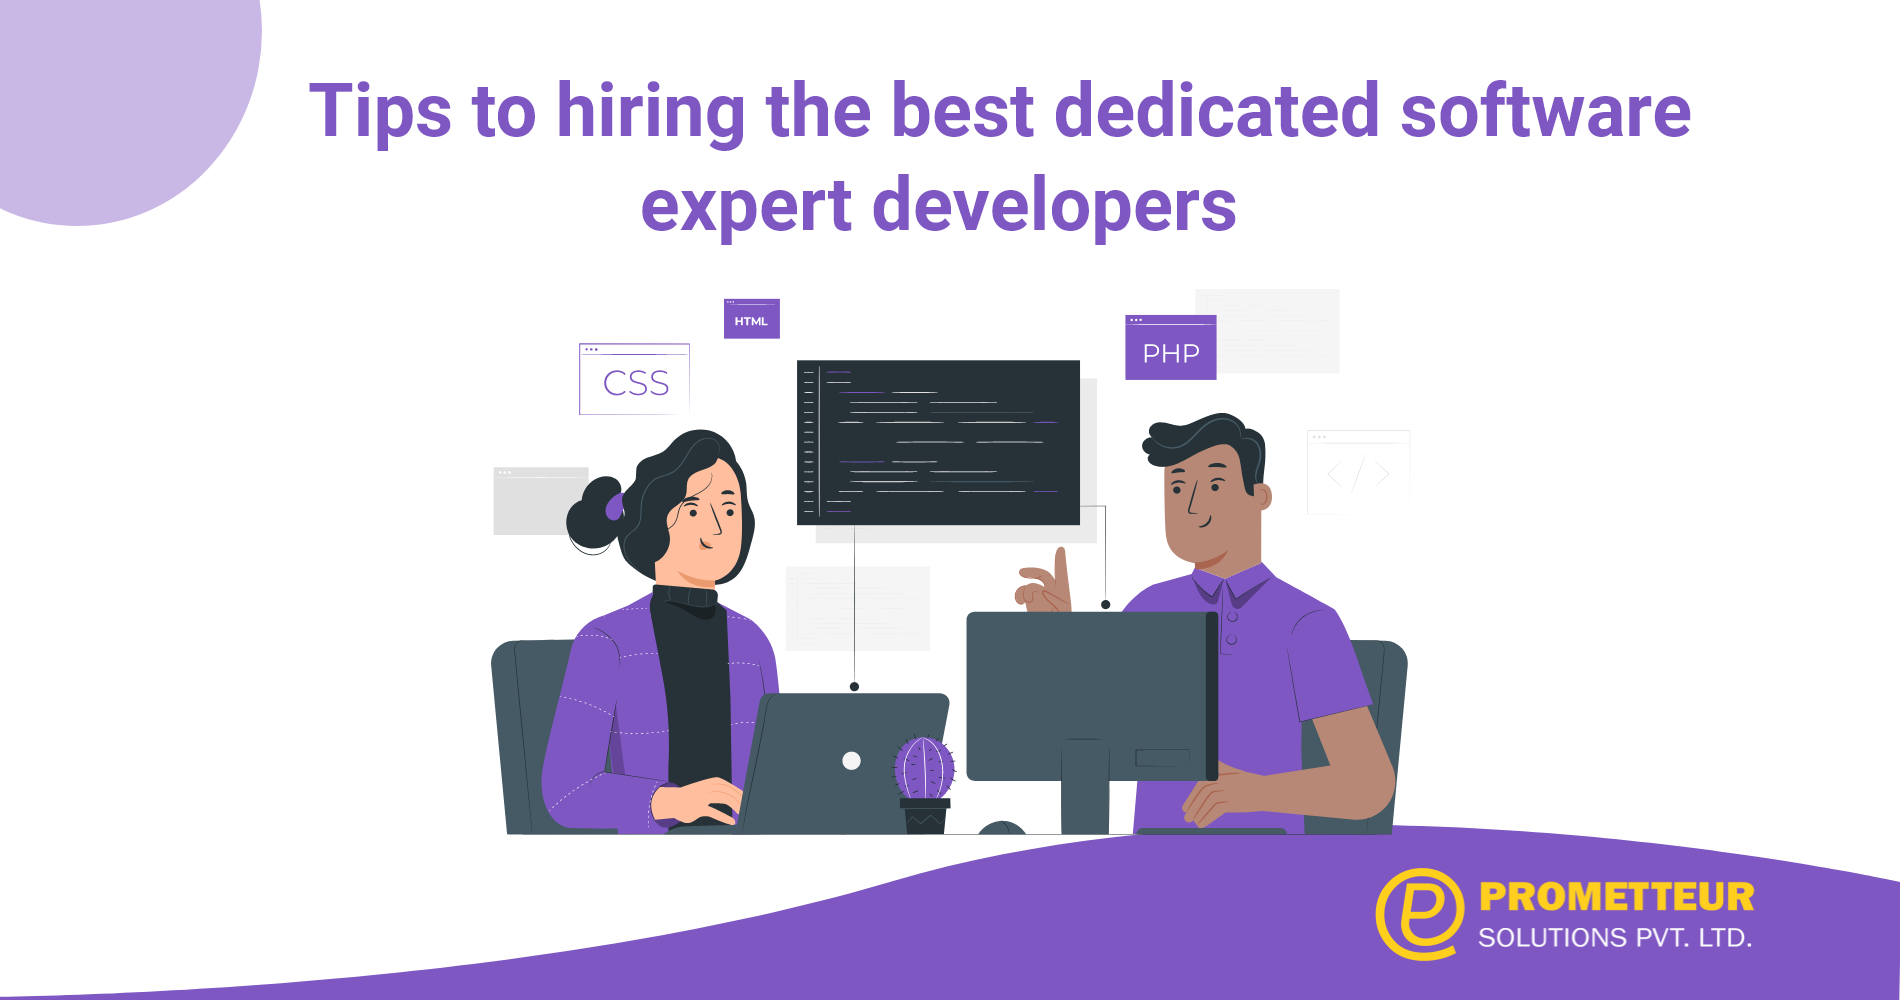 Tips to hiring the best dedicated software expert developers